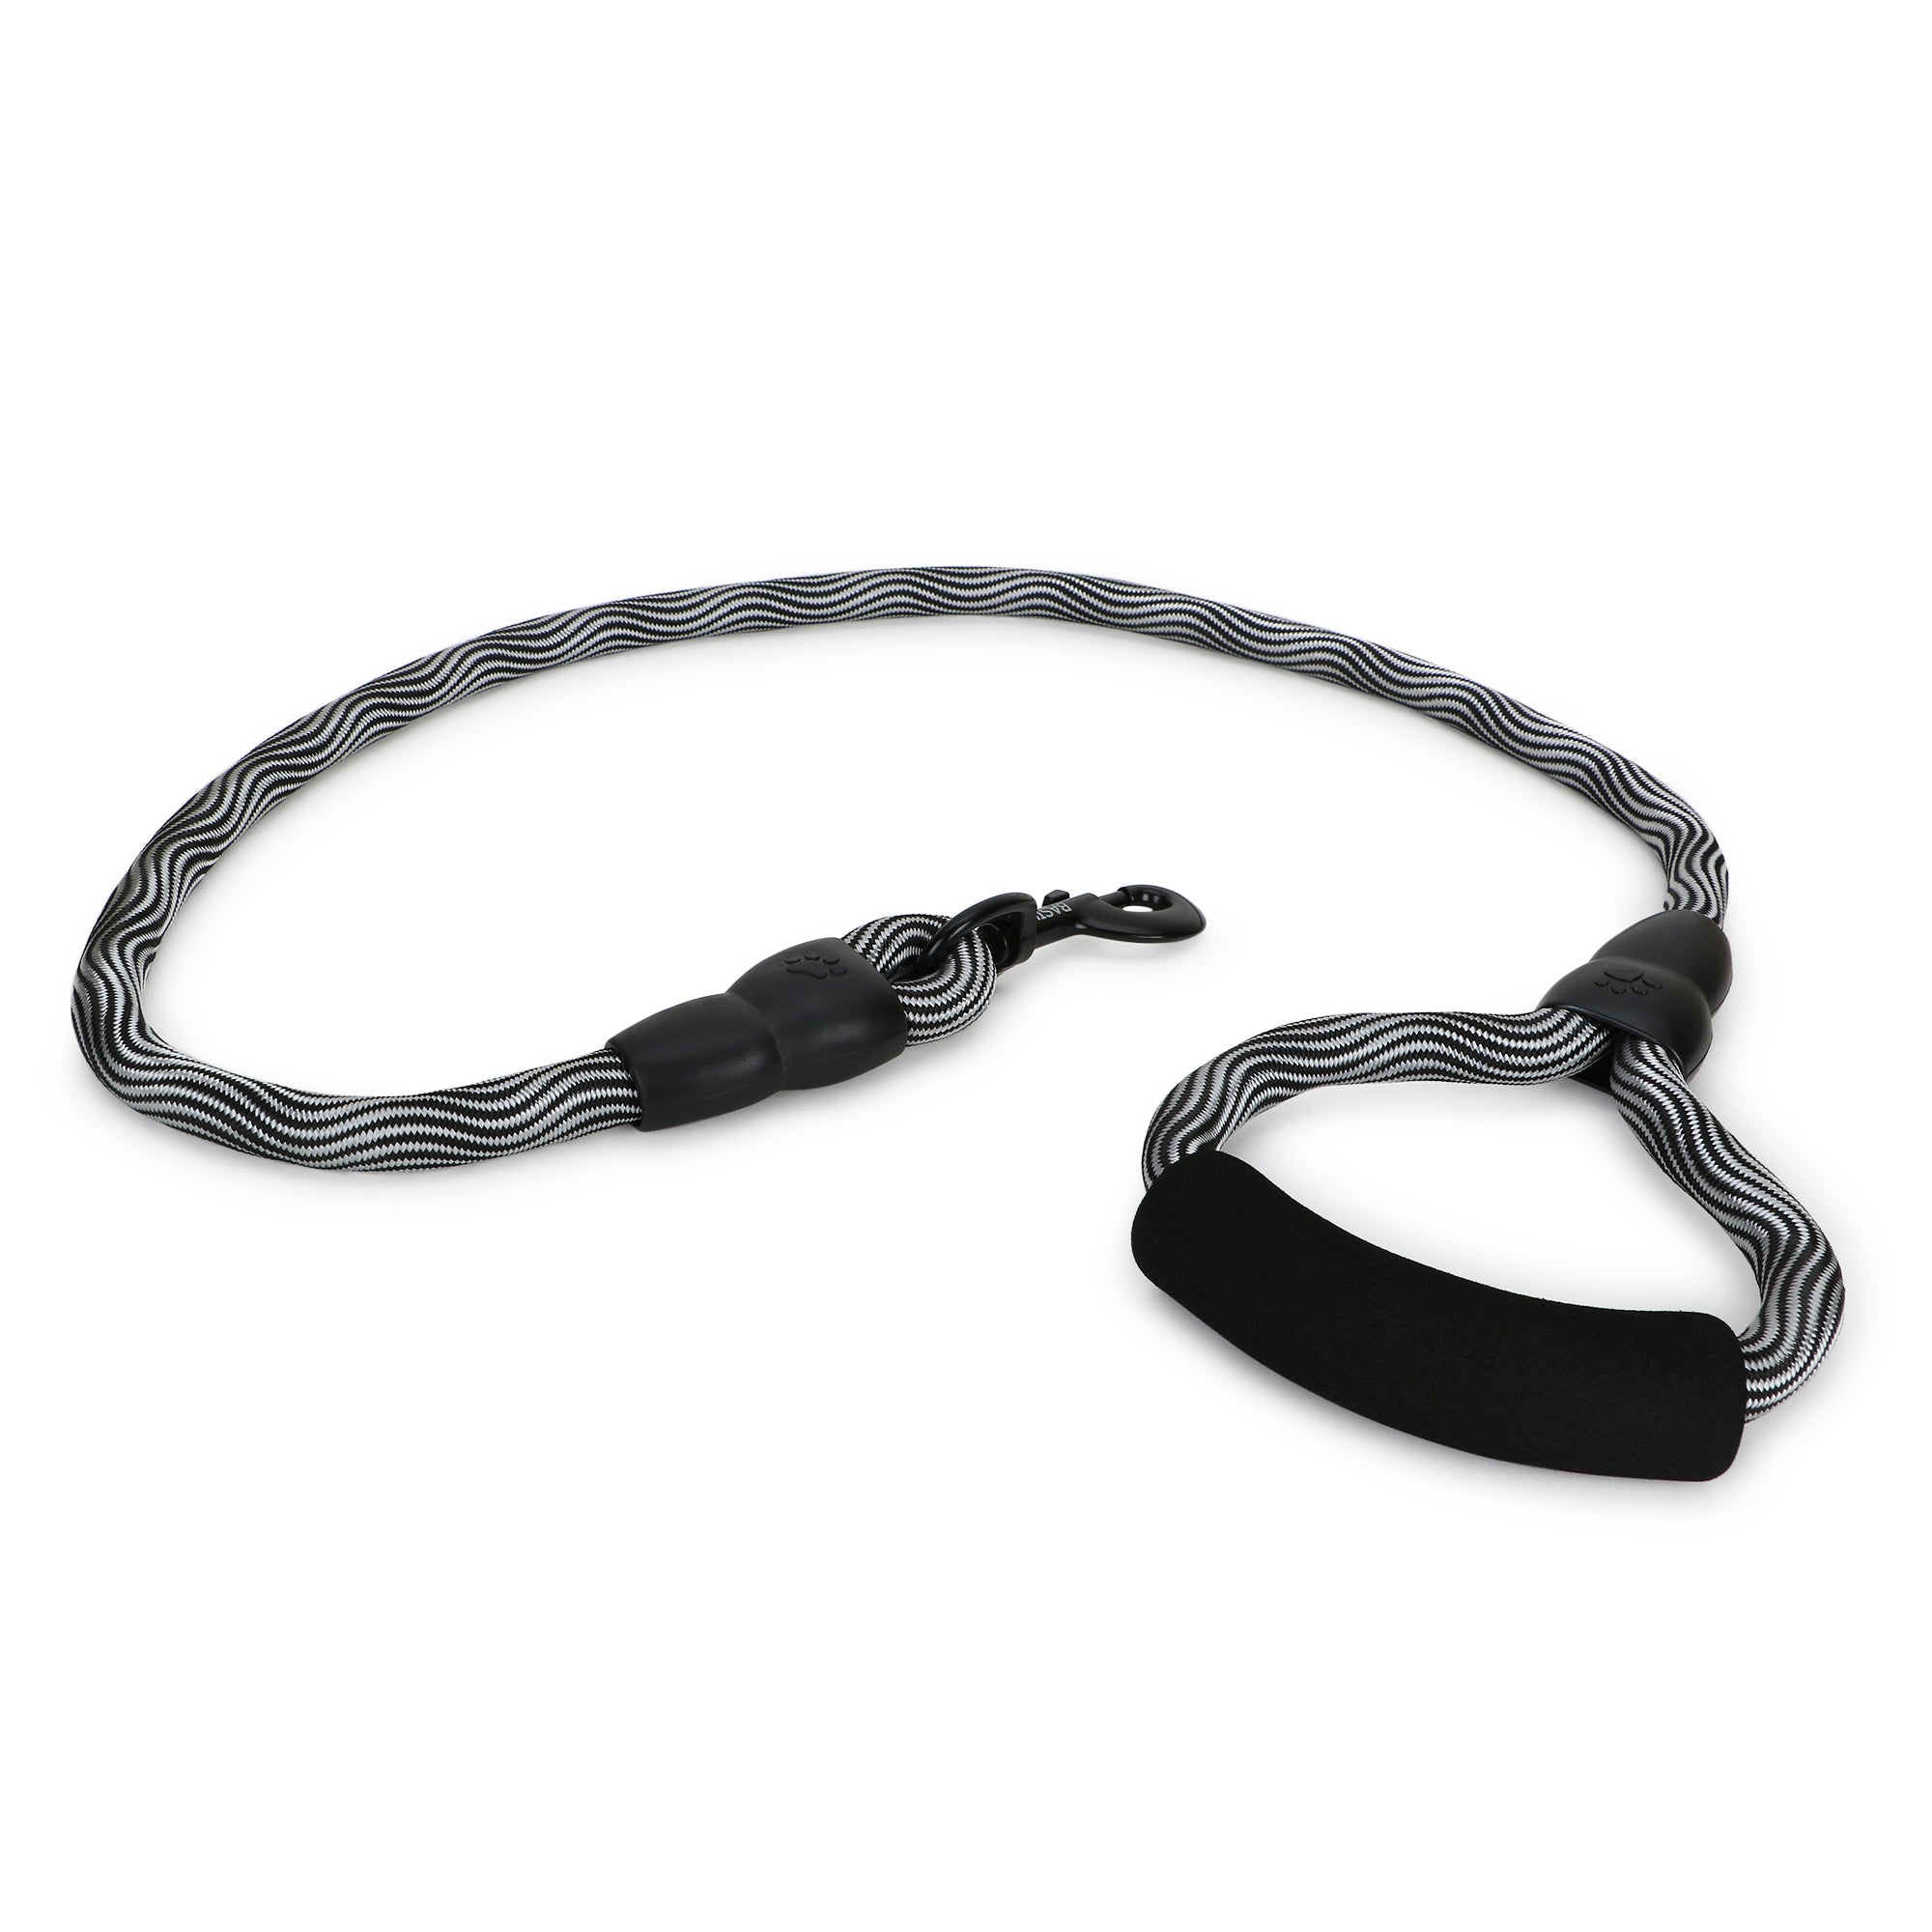 High Reflective Rope Leash for Dogs, 4 Feet (Black & Gray)